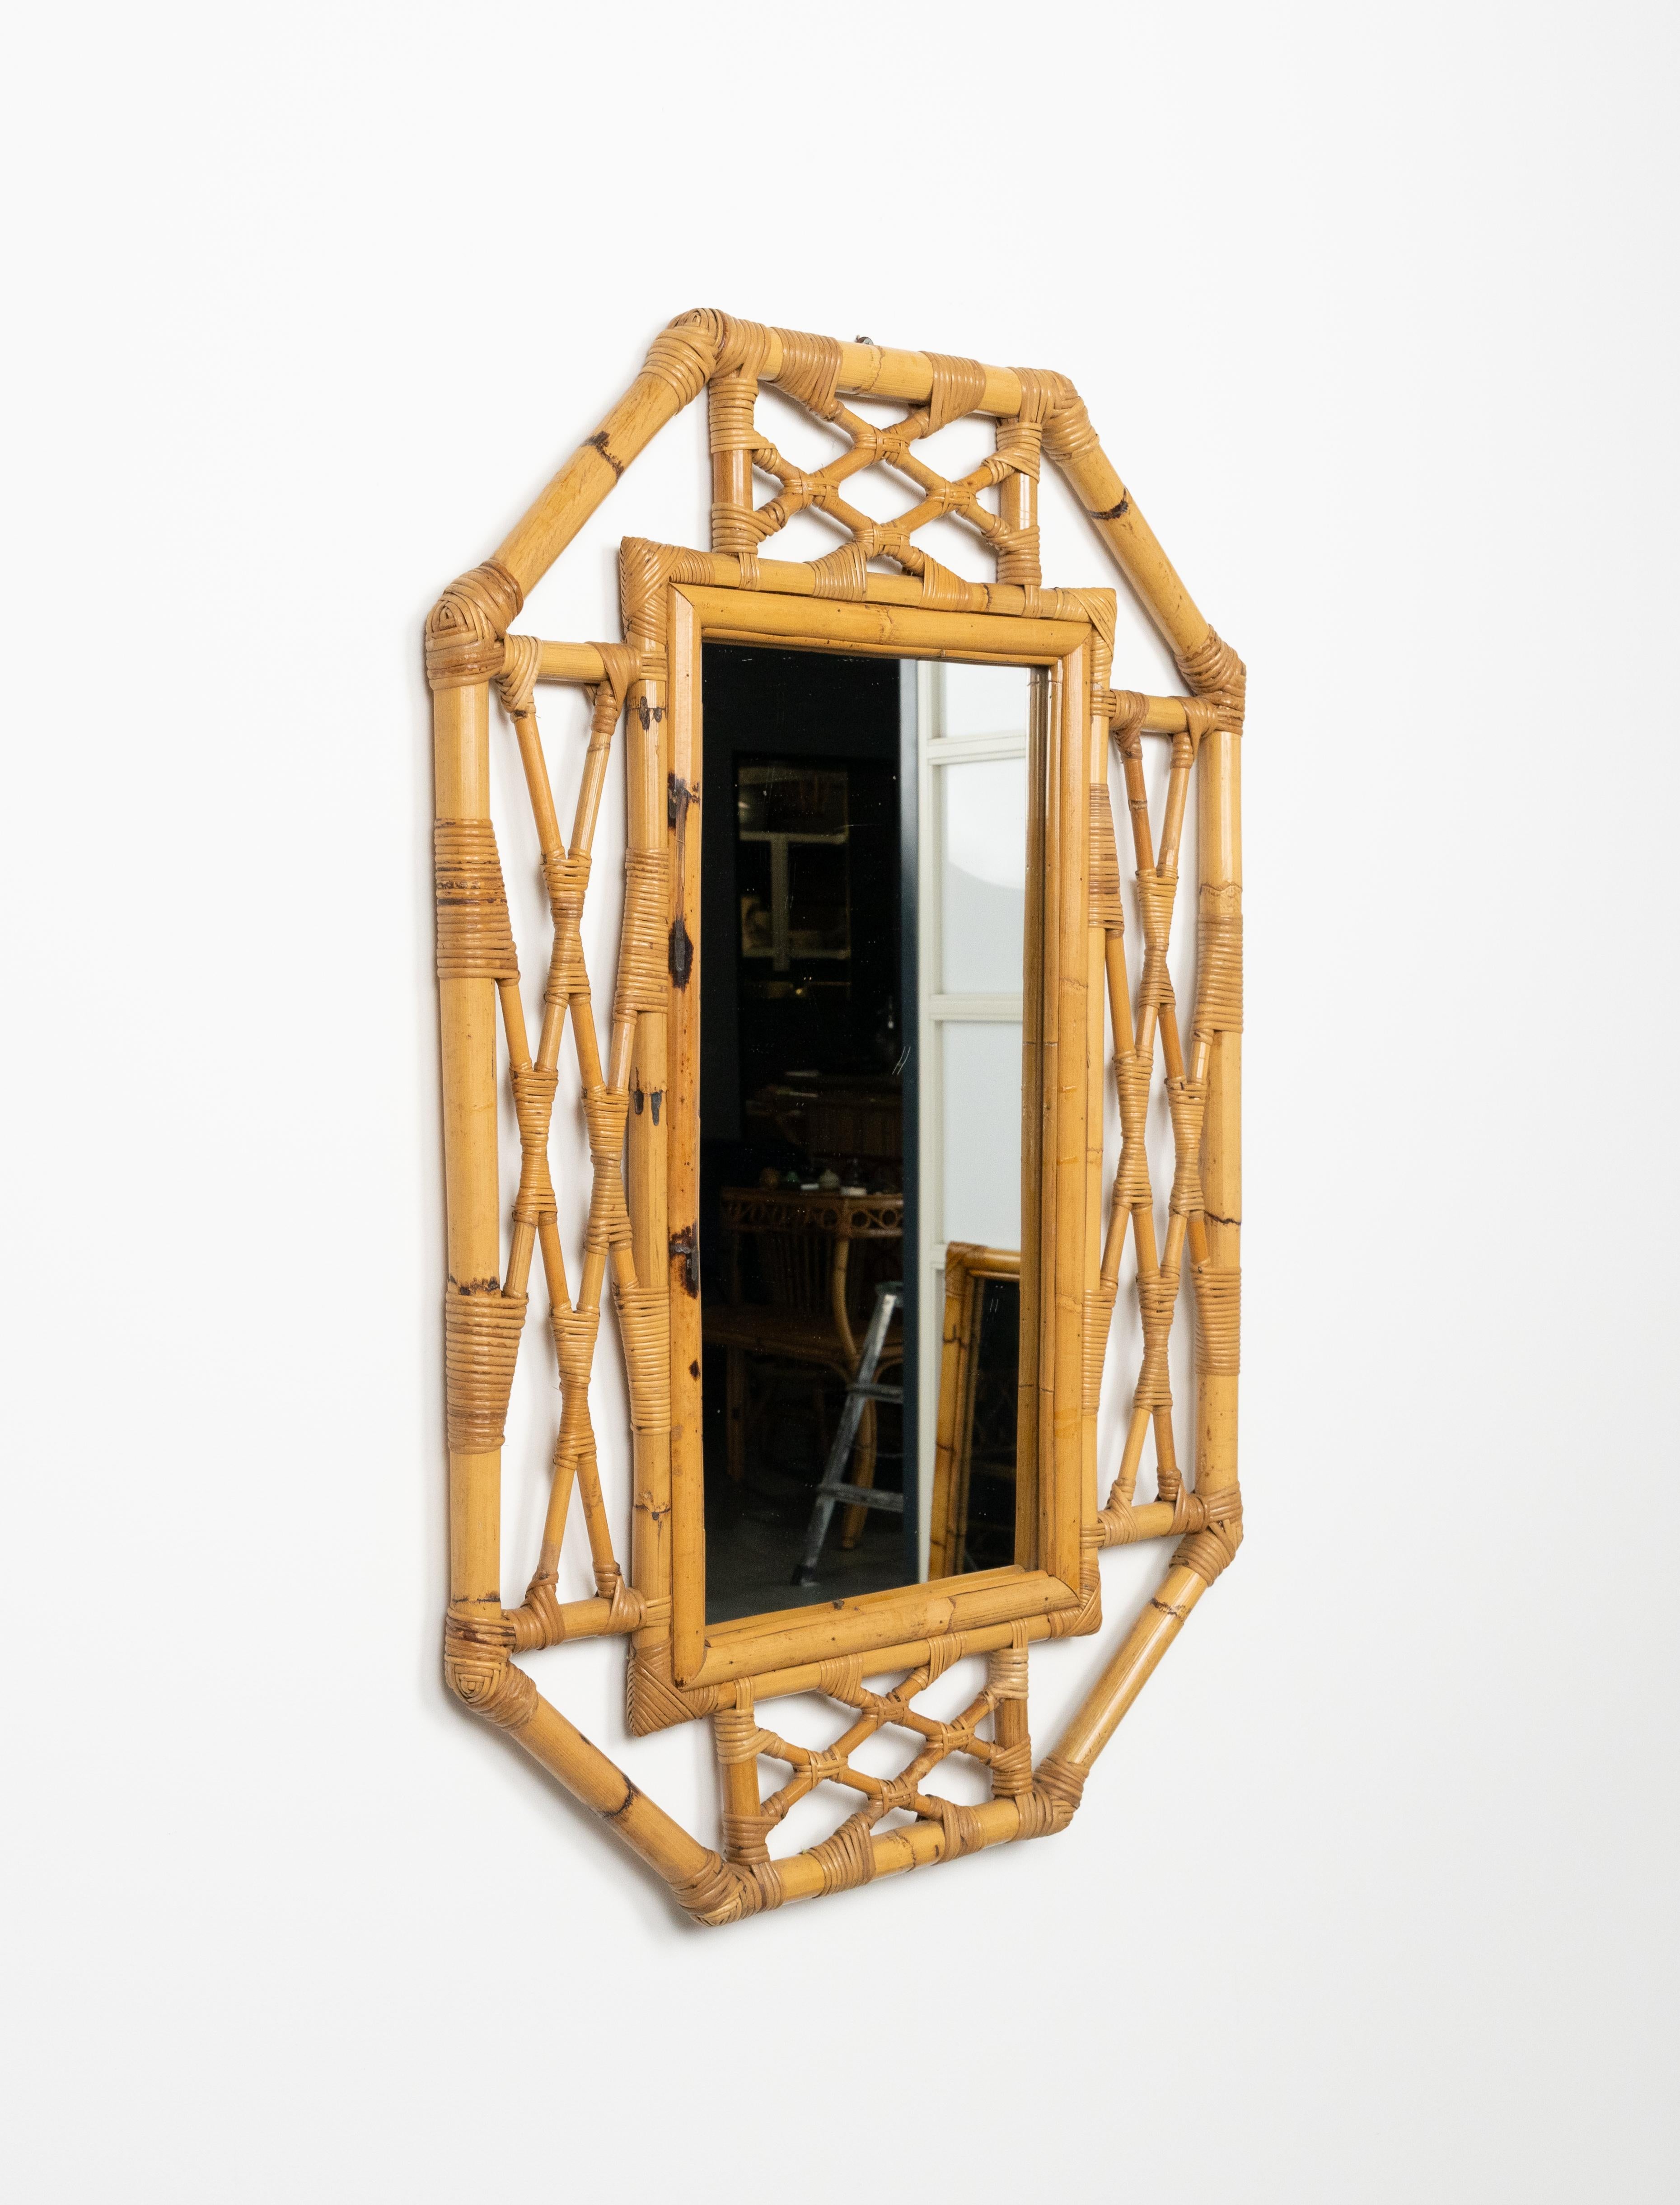 Midcentury Bamboo and Rattan Wall Mirror Vivai Del Sud Style, Italy 1970s For Sale 4